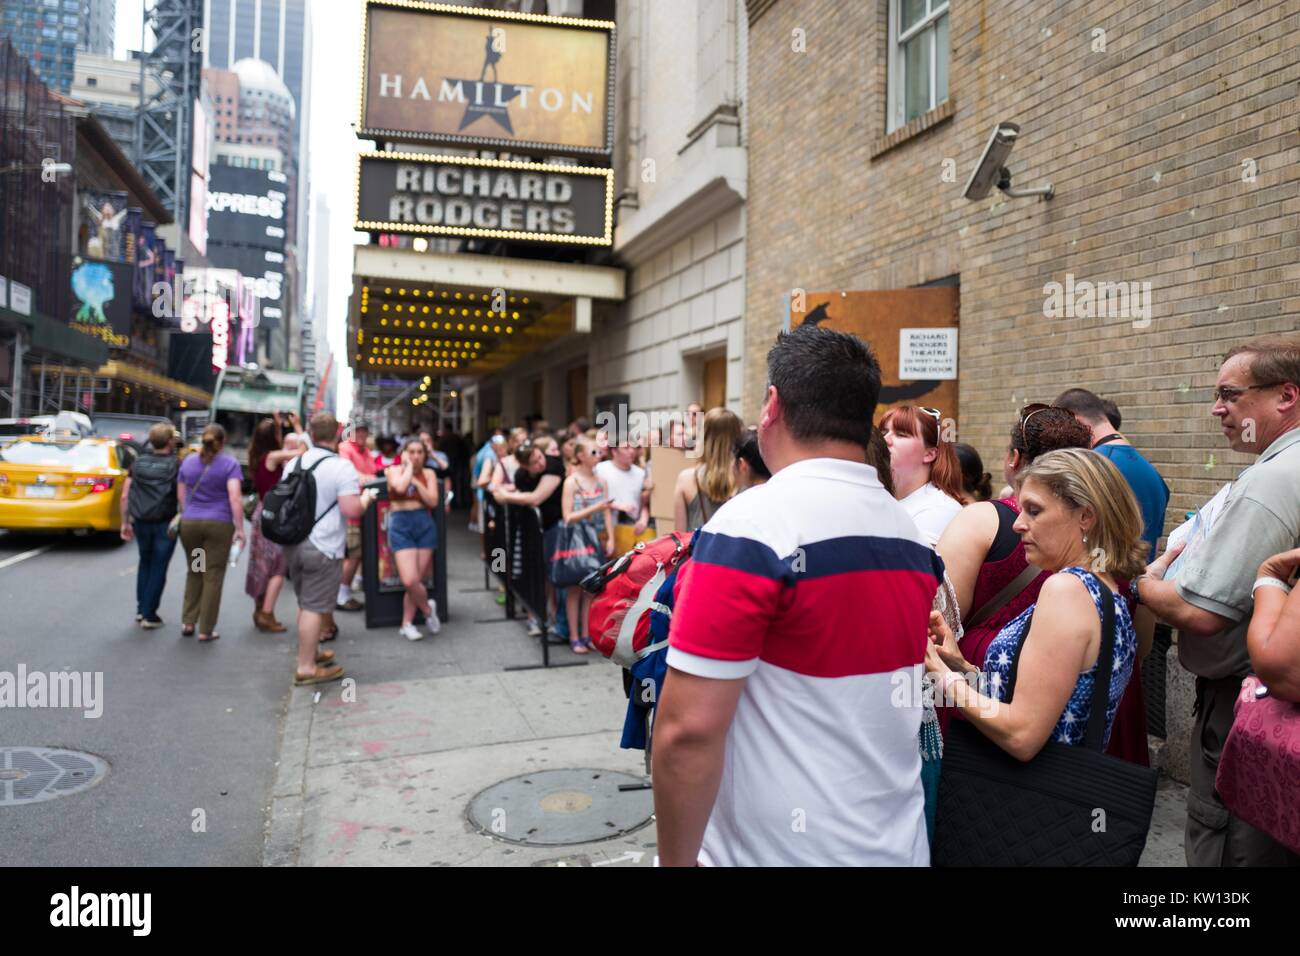 Before a performance of the Broadway musical Hamilton two days prior to creator Lin Manuel Miranda's departure from the show, fans gather at the stage door as musicians enter the theatre, New York City, New York, July 7, 2016. Stock Photo